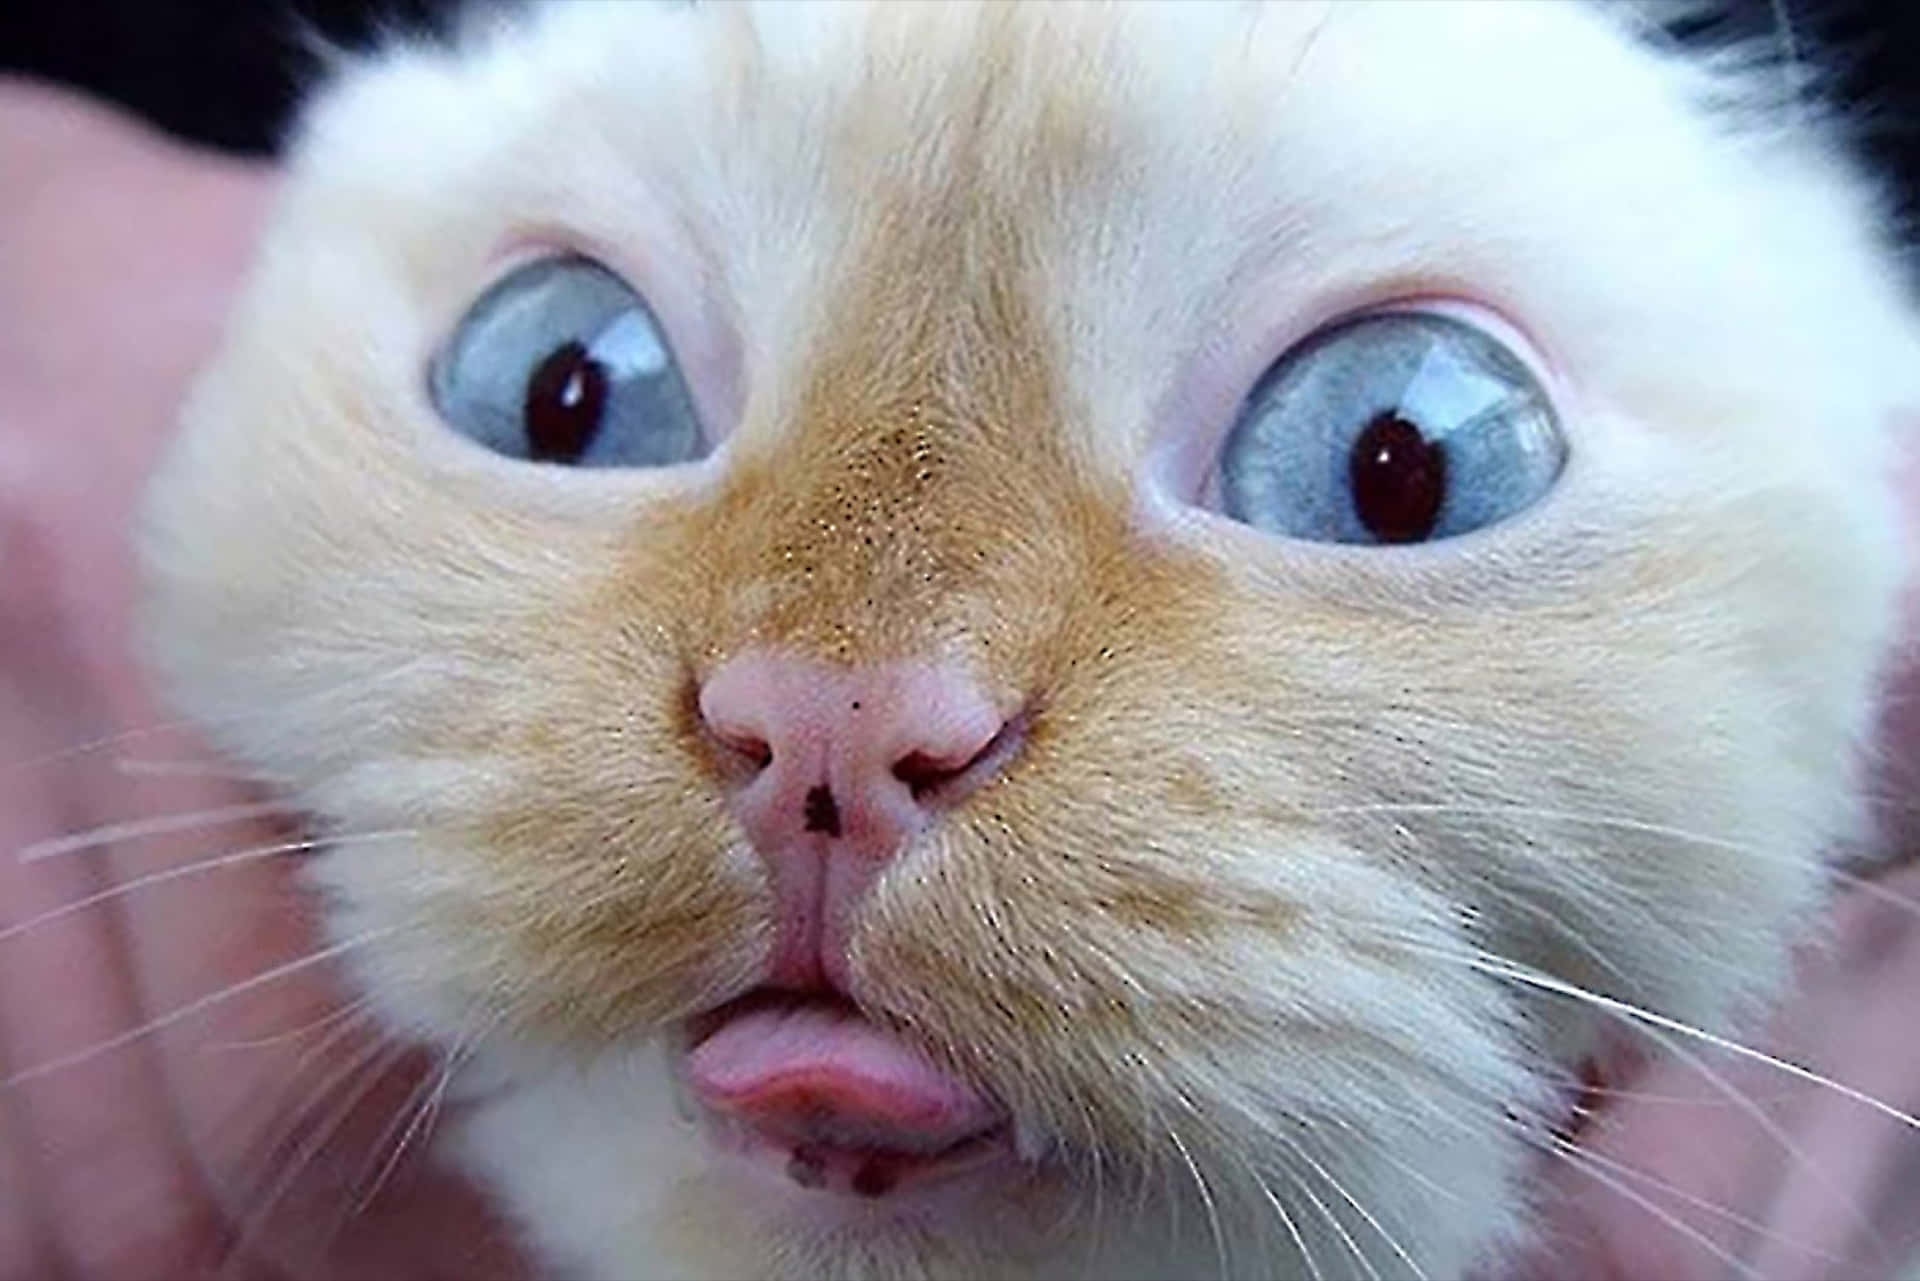 This silly-looking cat will make you laugh out loud!